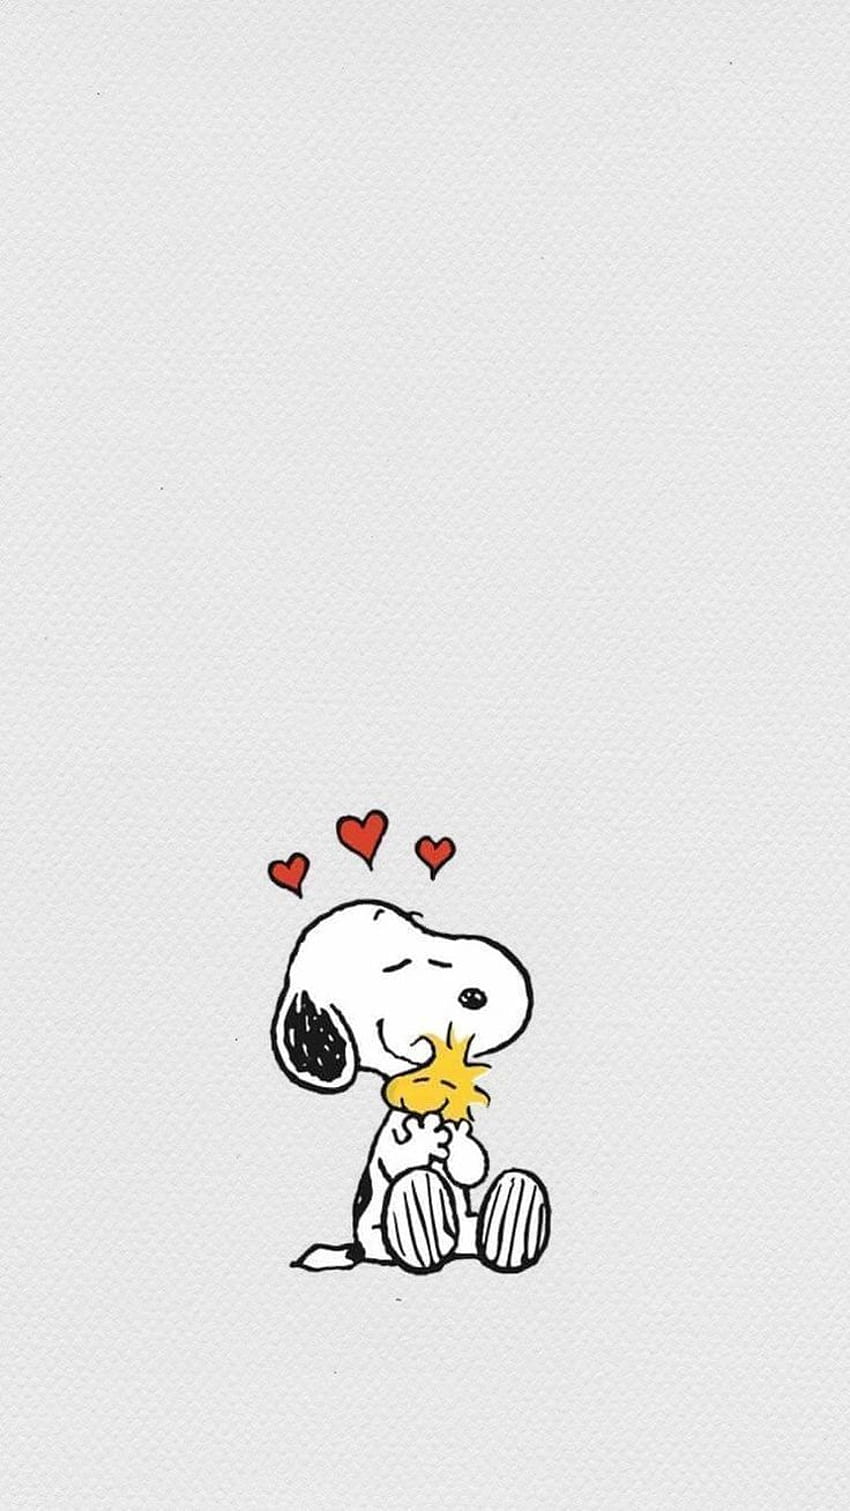 IPhone wallpaper of snoopy with hearts around his head - Charlie Brown, Snoopy